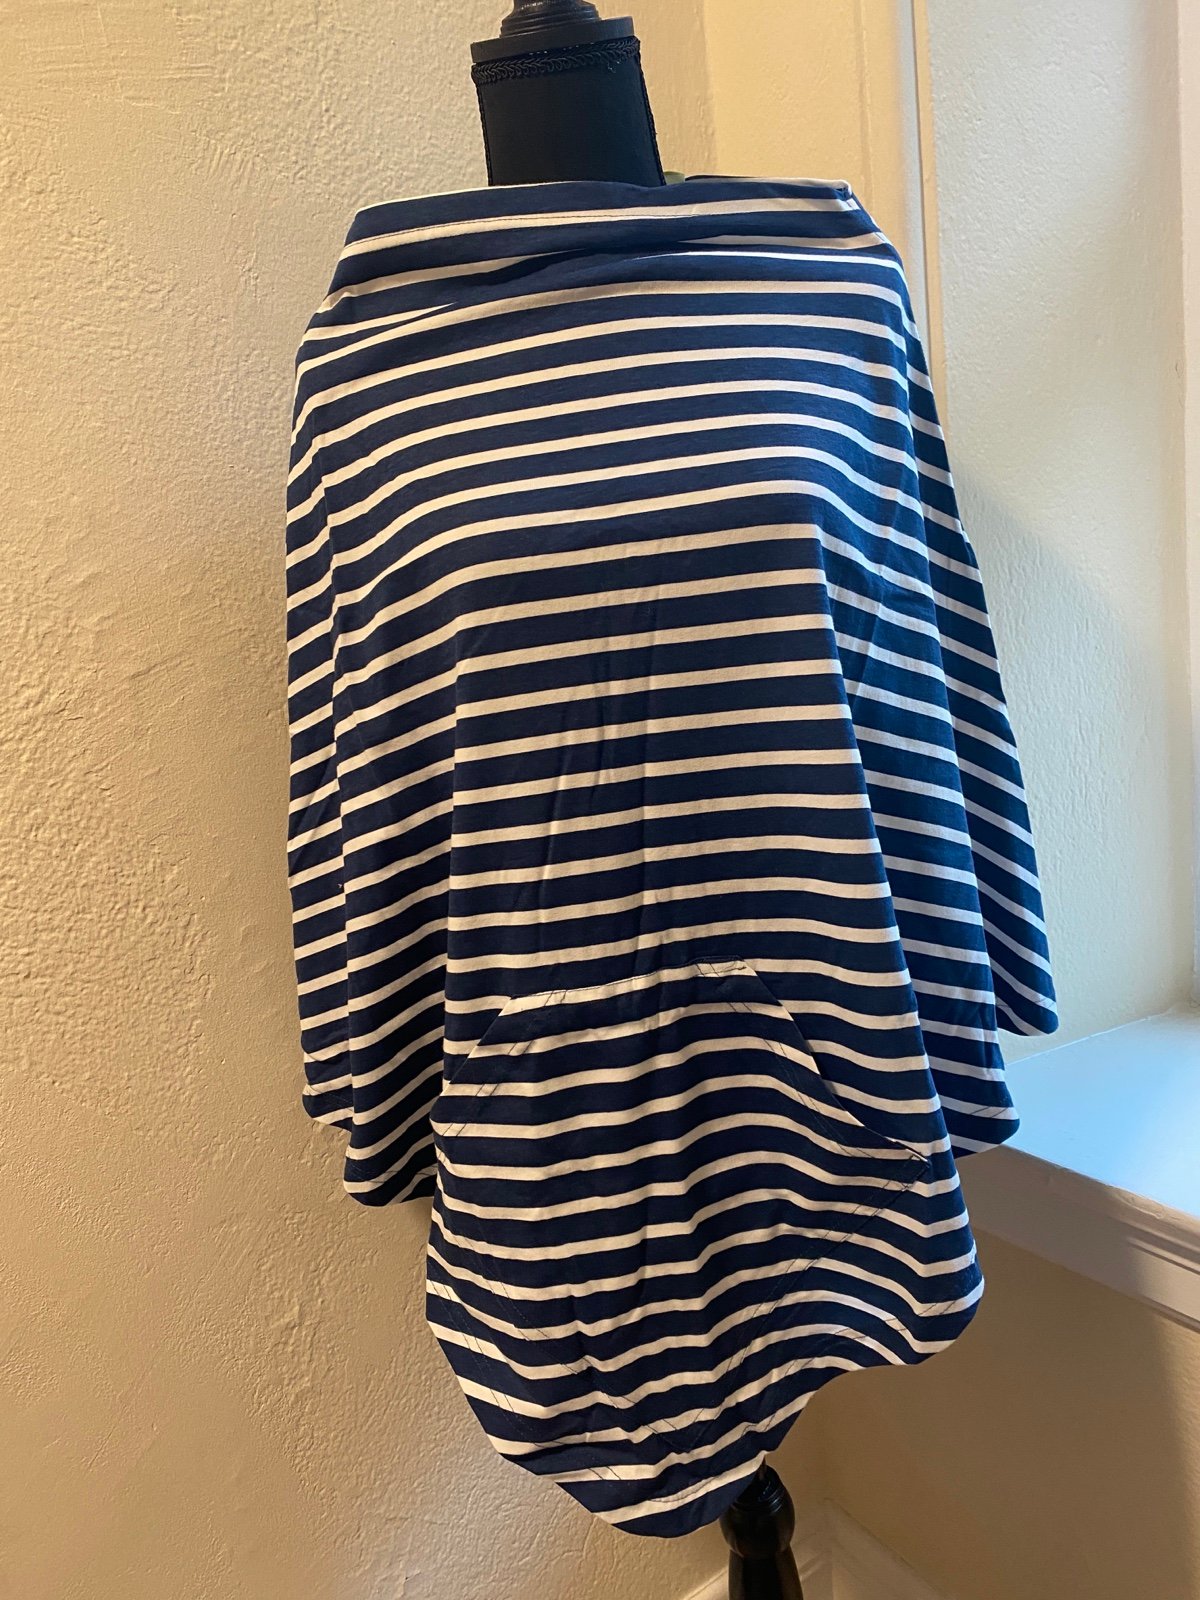 Popular Cotton Cape Pullover m5h1E4aDn Everyday Low Prices